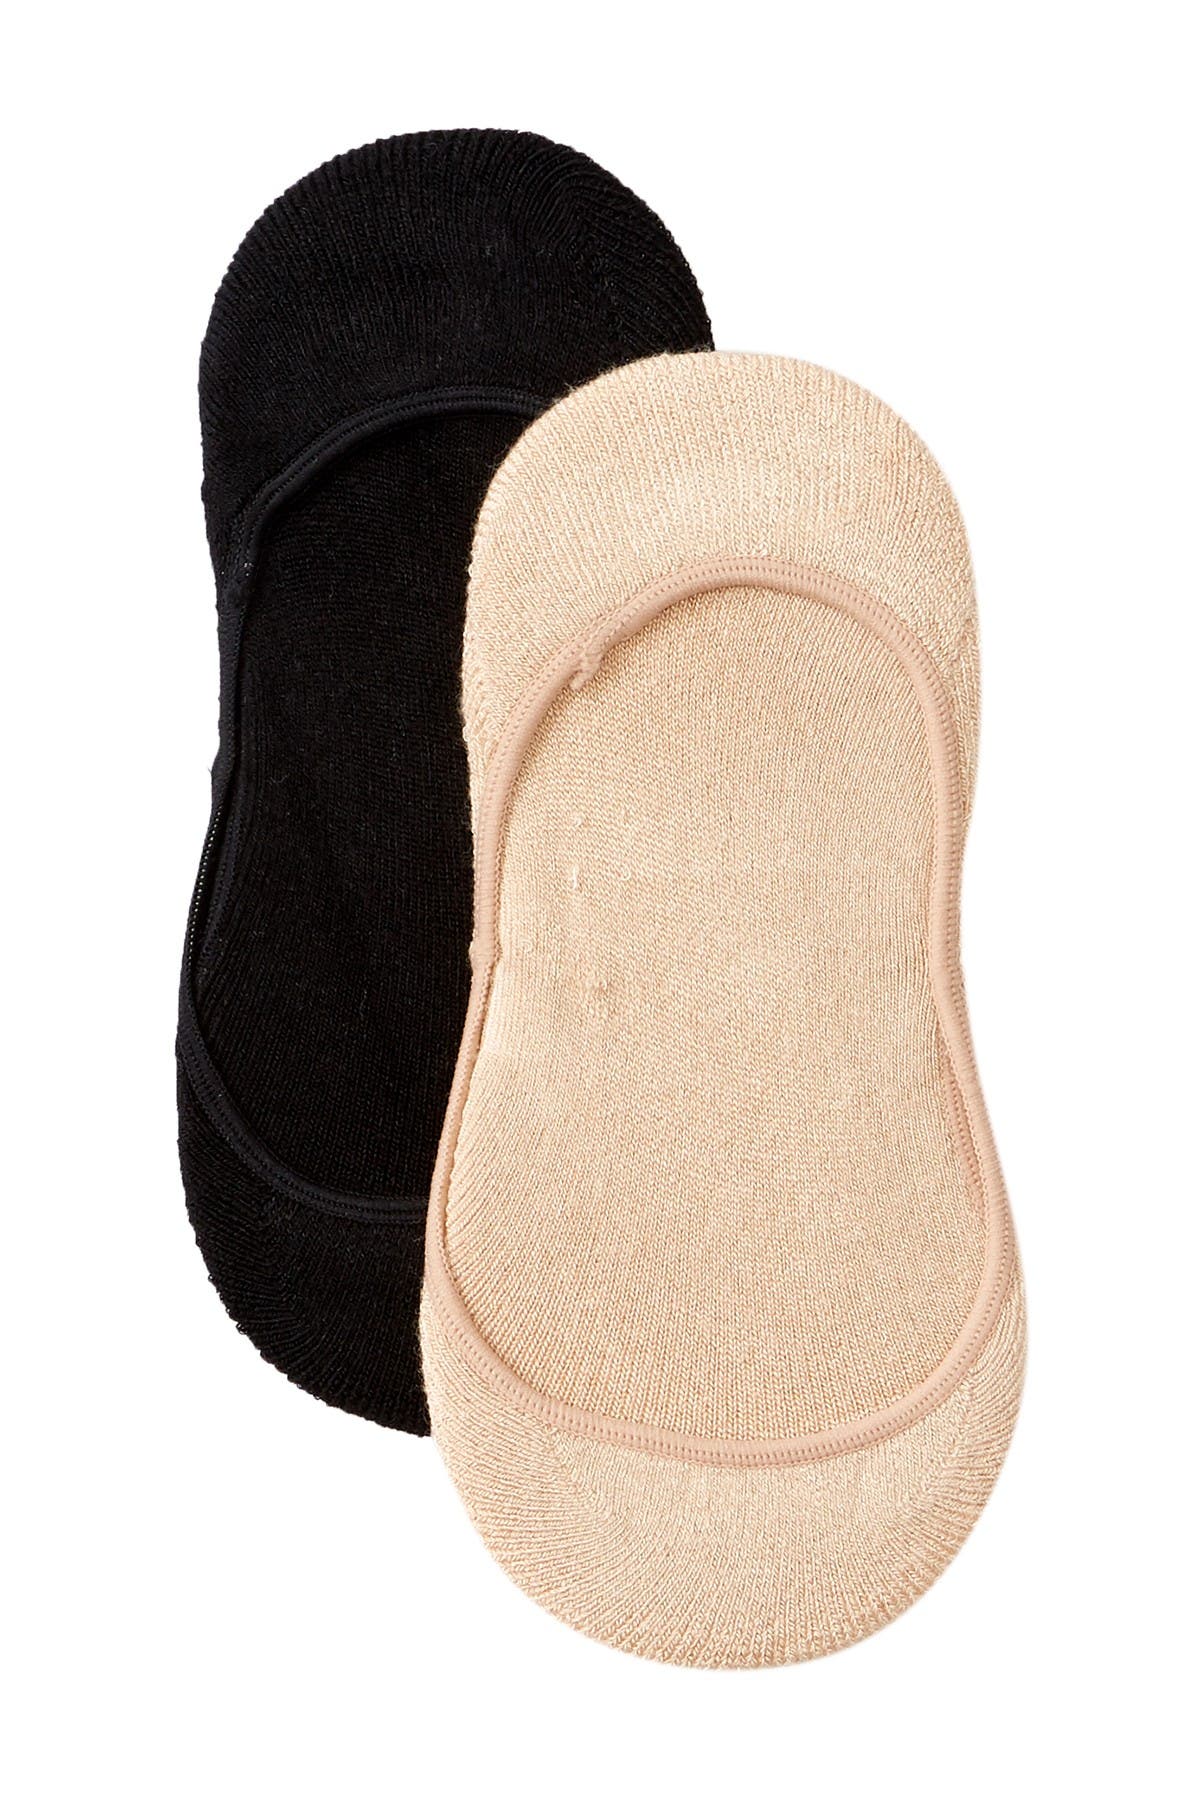 shimera | Pillow Sole No Show Socks - Pack of 2 | Nordstrom Rack